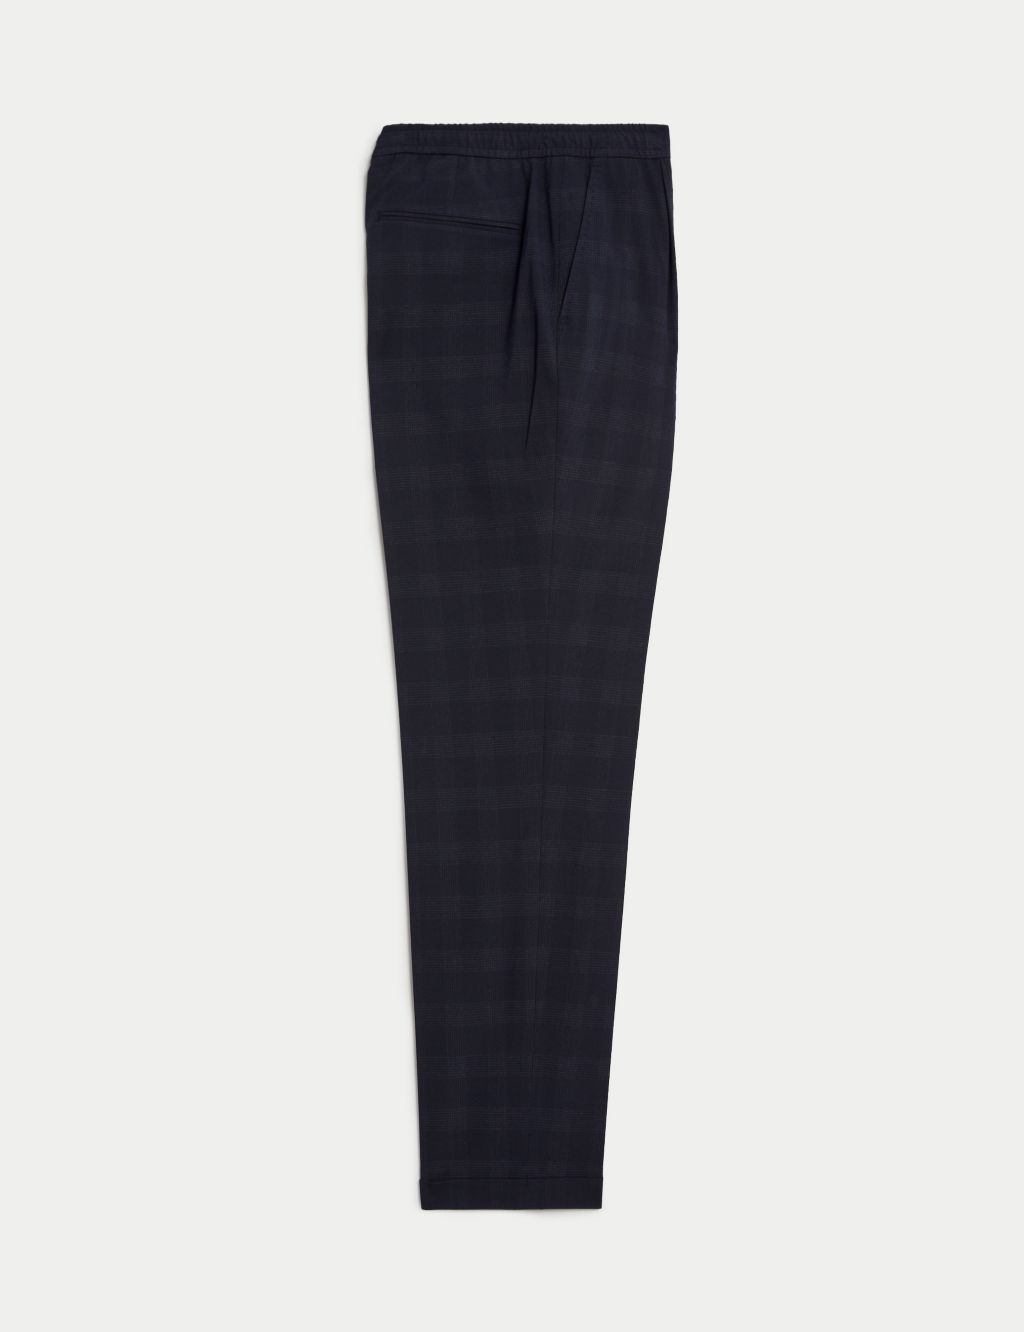 Check Single Pleat Elasticated Trousers image 2